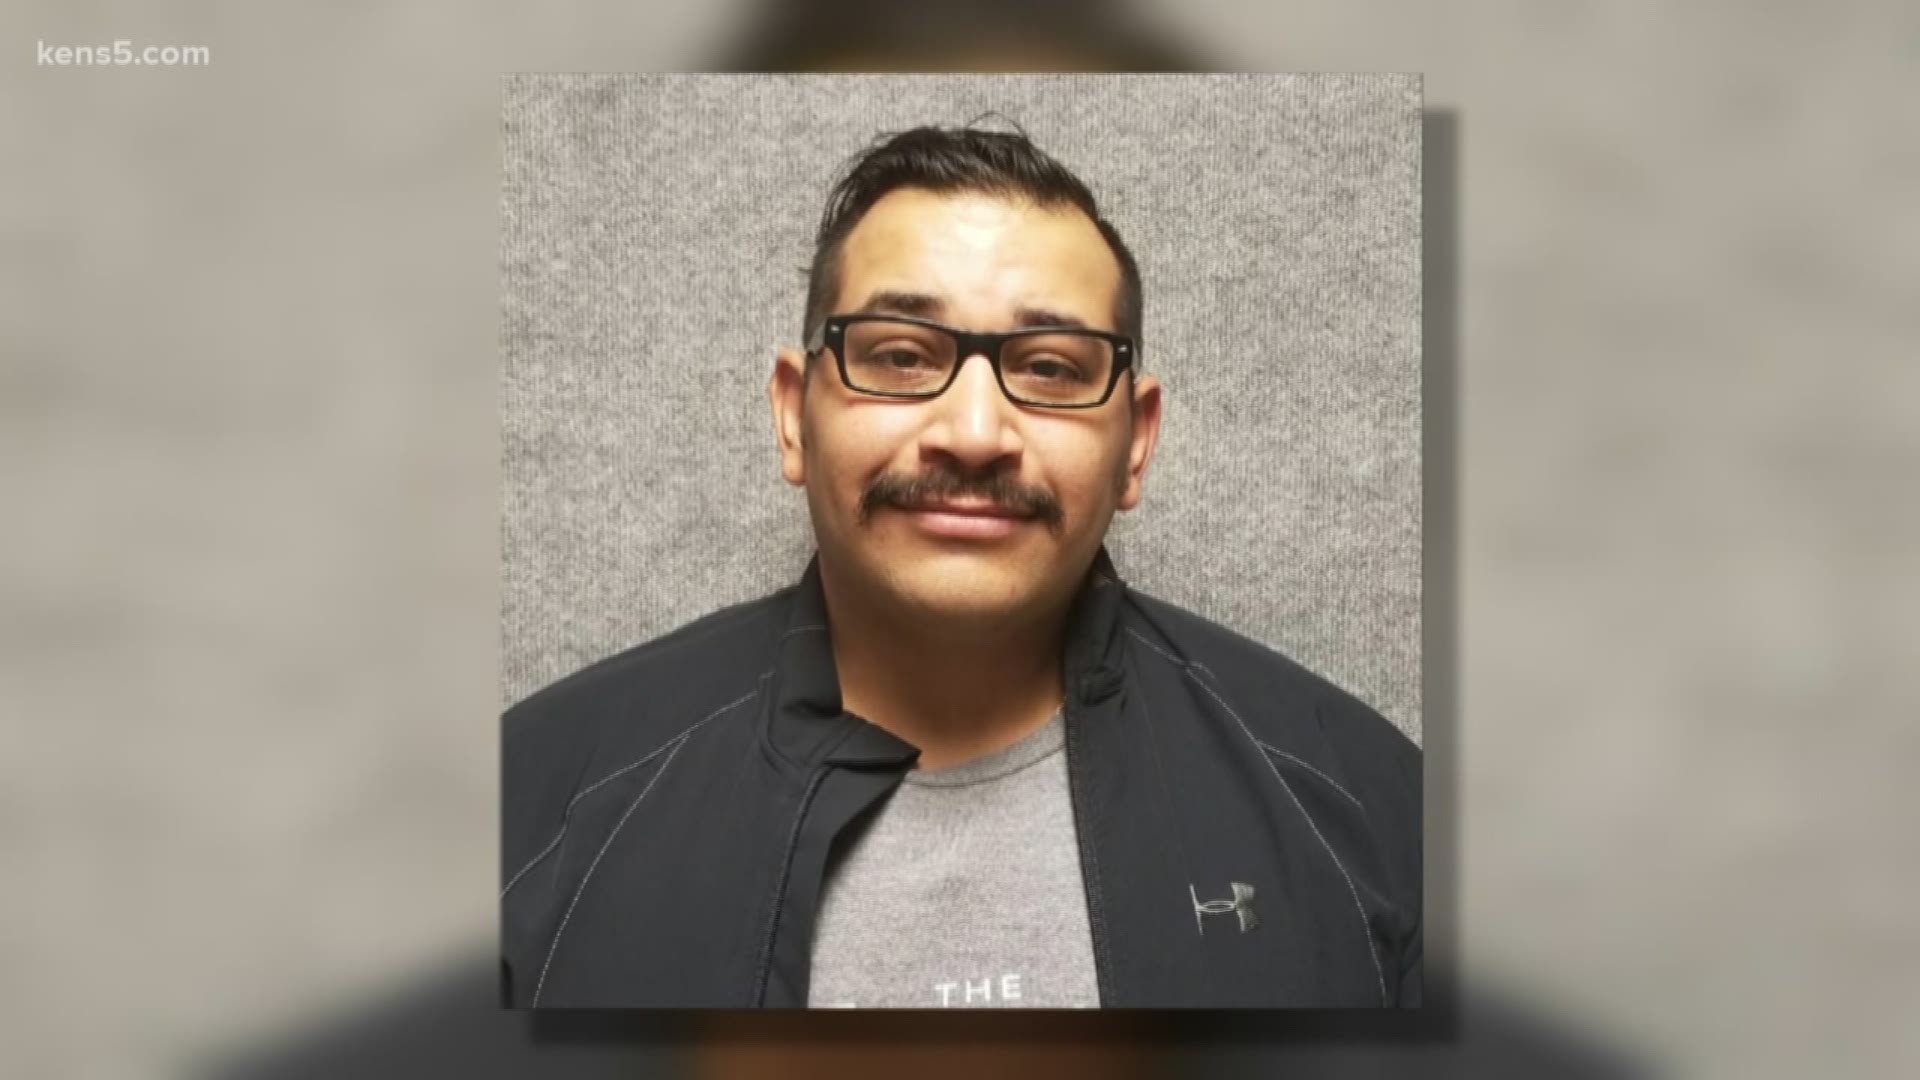 The San Antonio Police Department has announced an arrest in connection with a body that was found stuffed in a barrel.